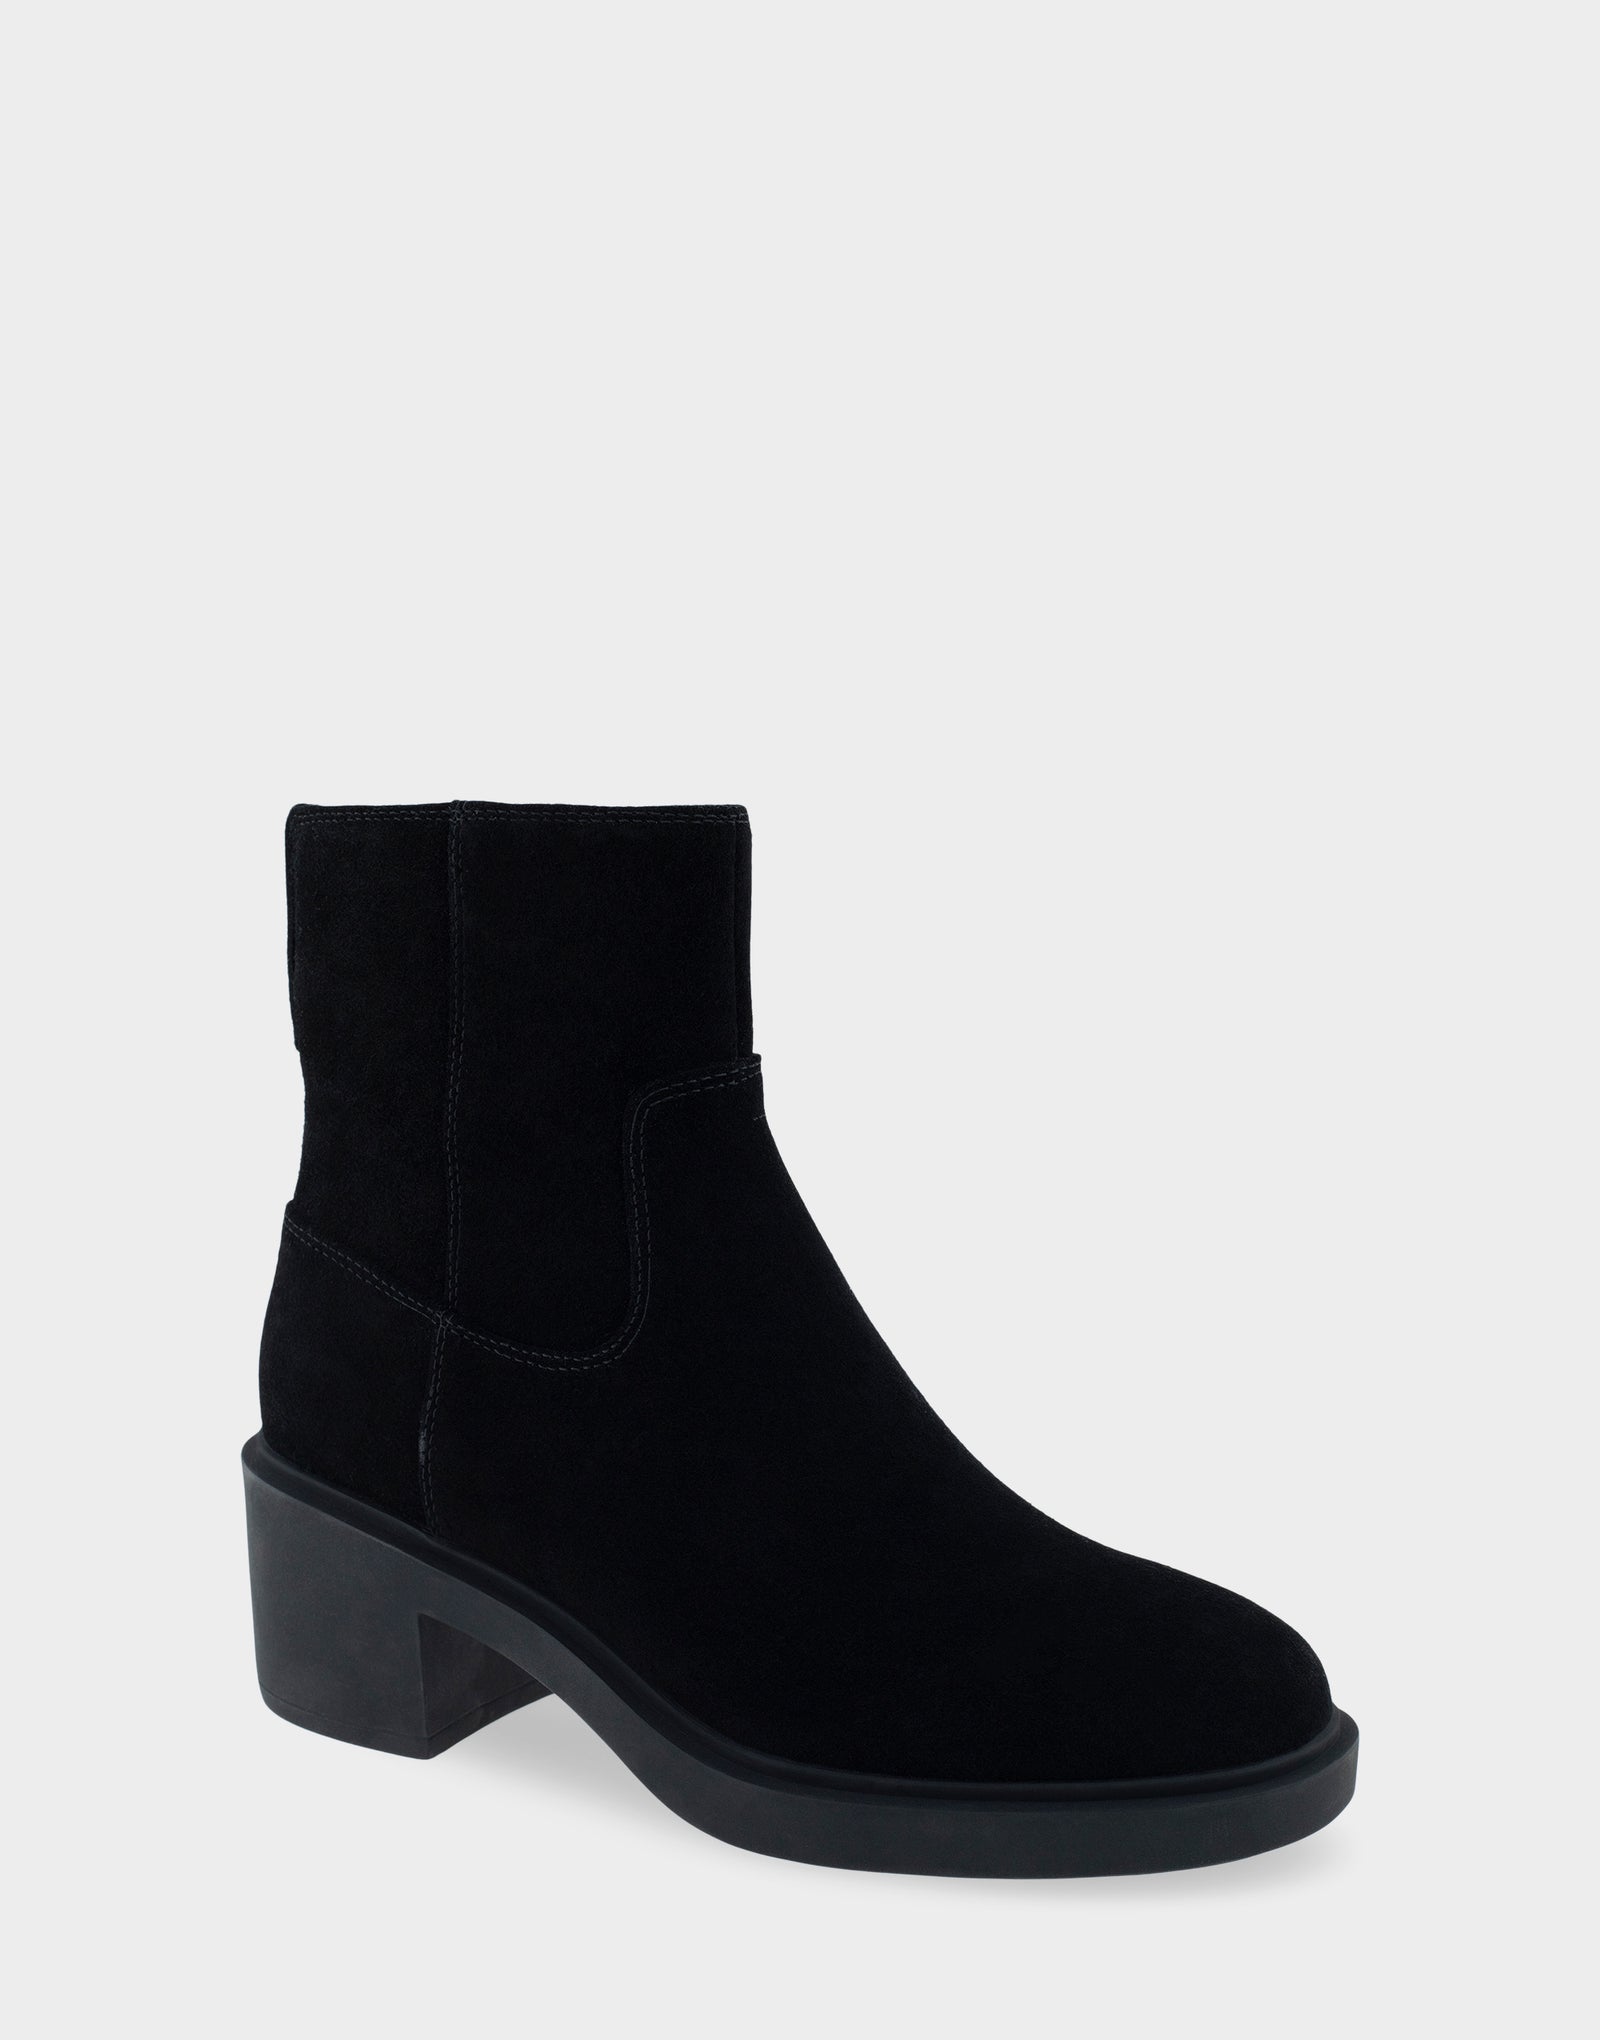 Buy NAOMI Pointed Toe Ankle Boots by Betts online - Betts